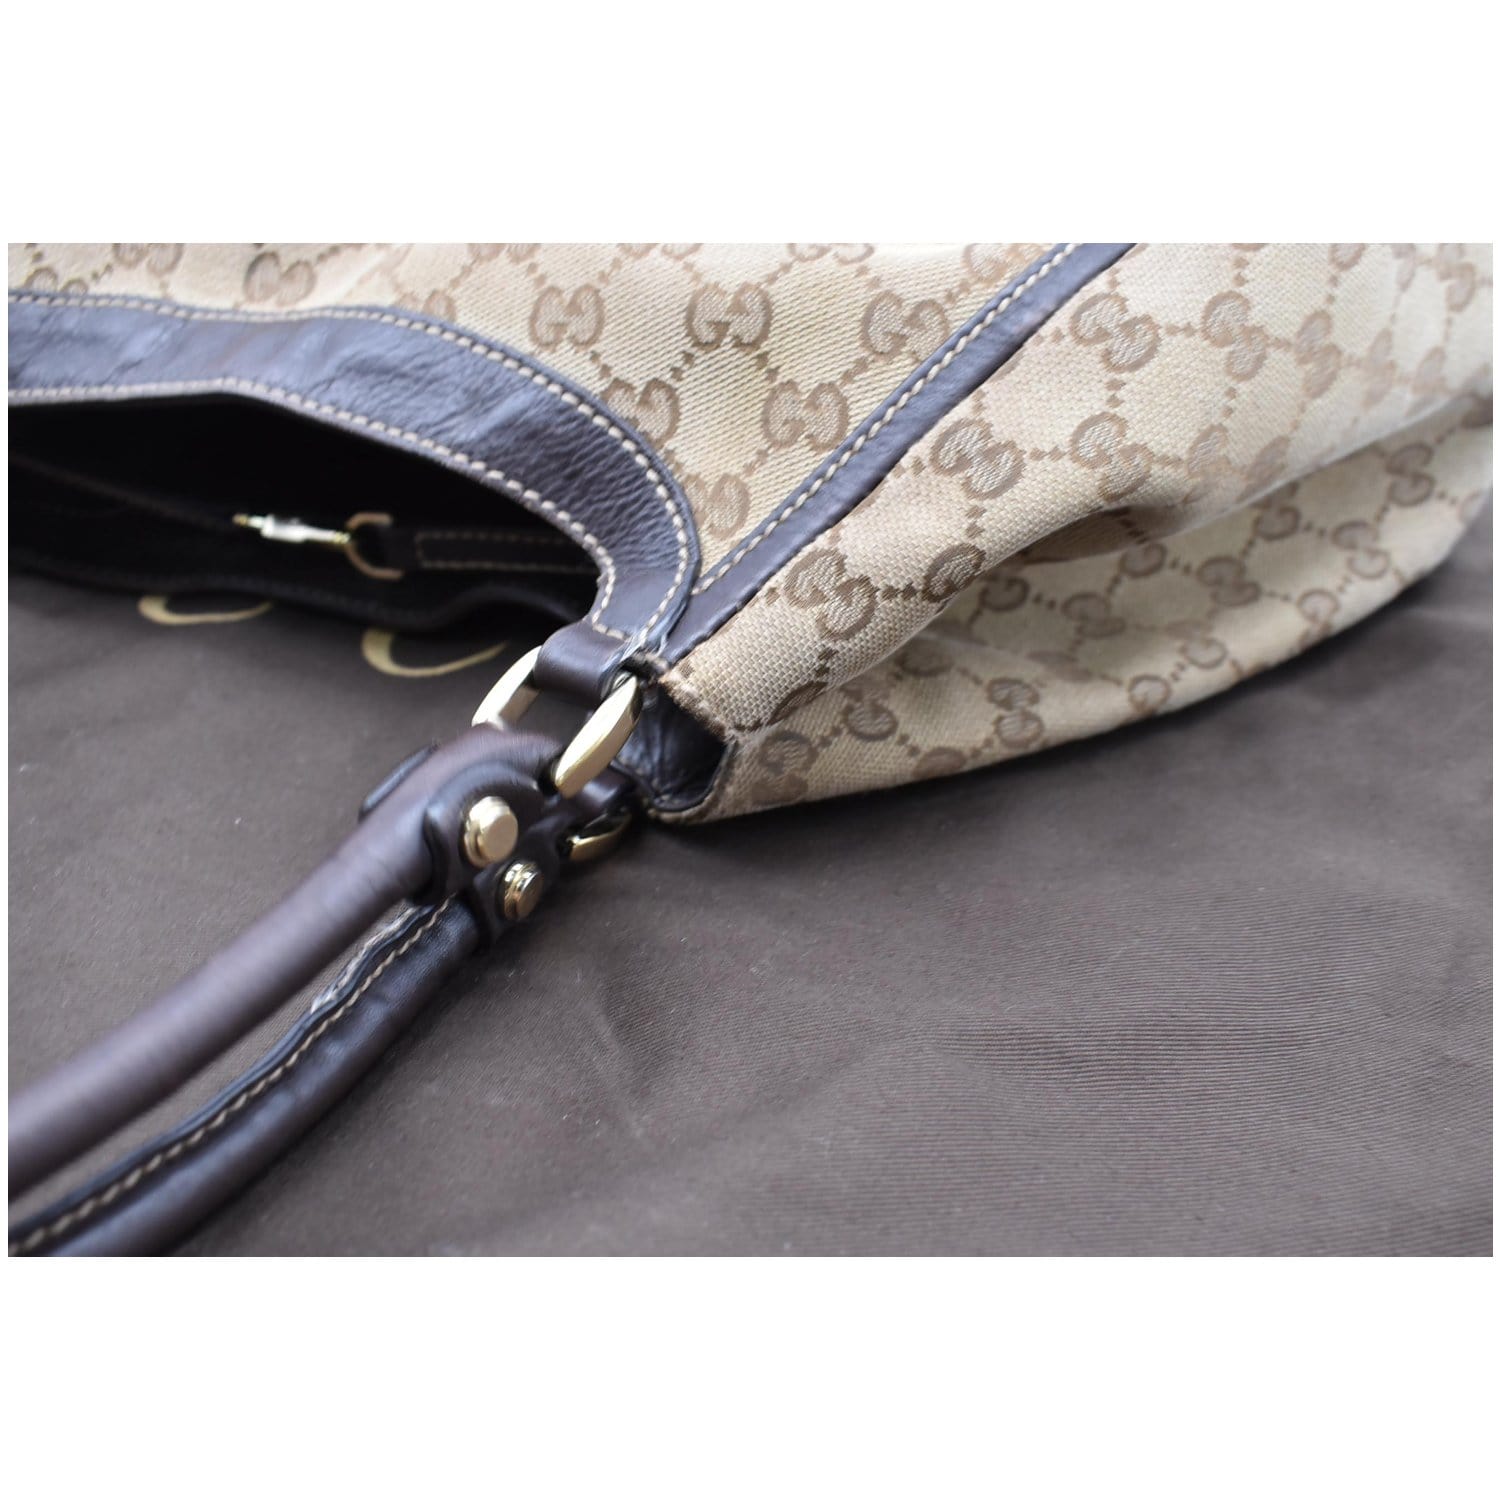 GUCCI Abbey GG Canvas D Ring GG Canvas Hobo Bag Beige 130738